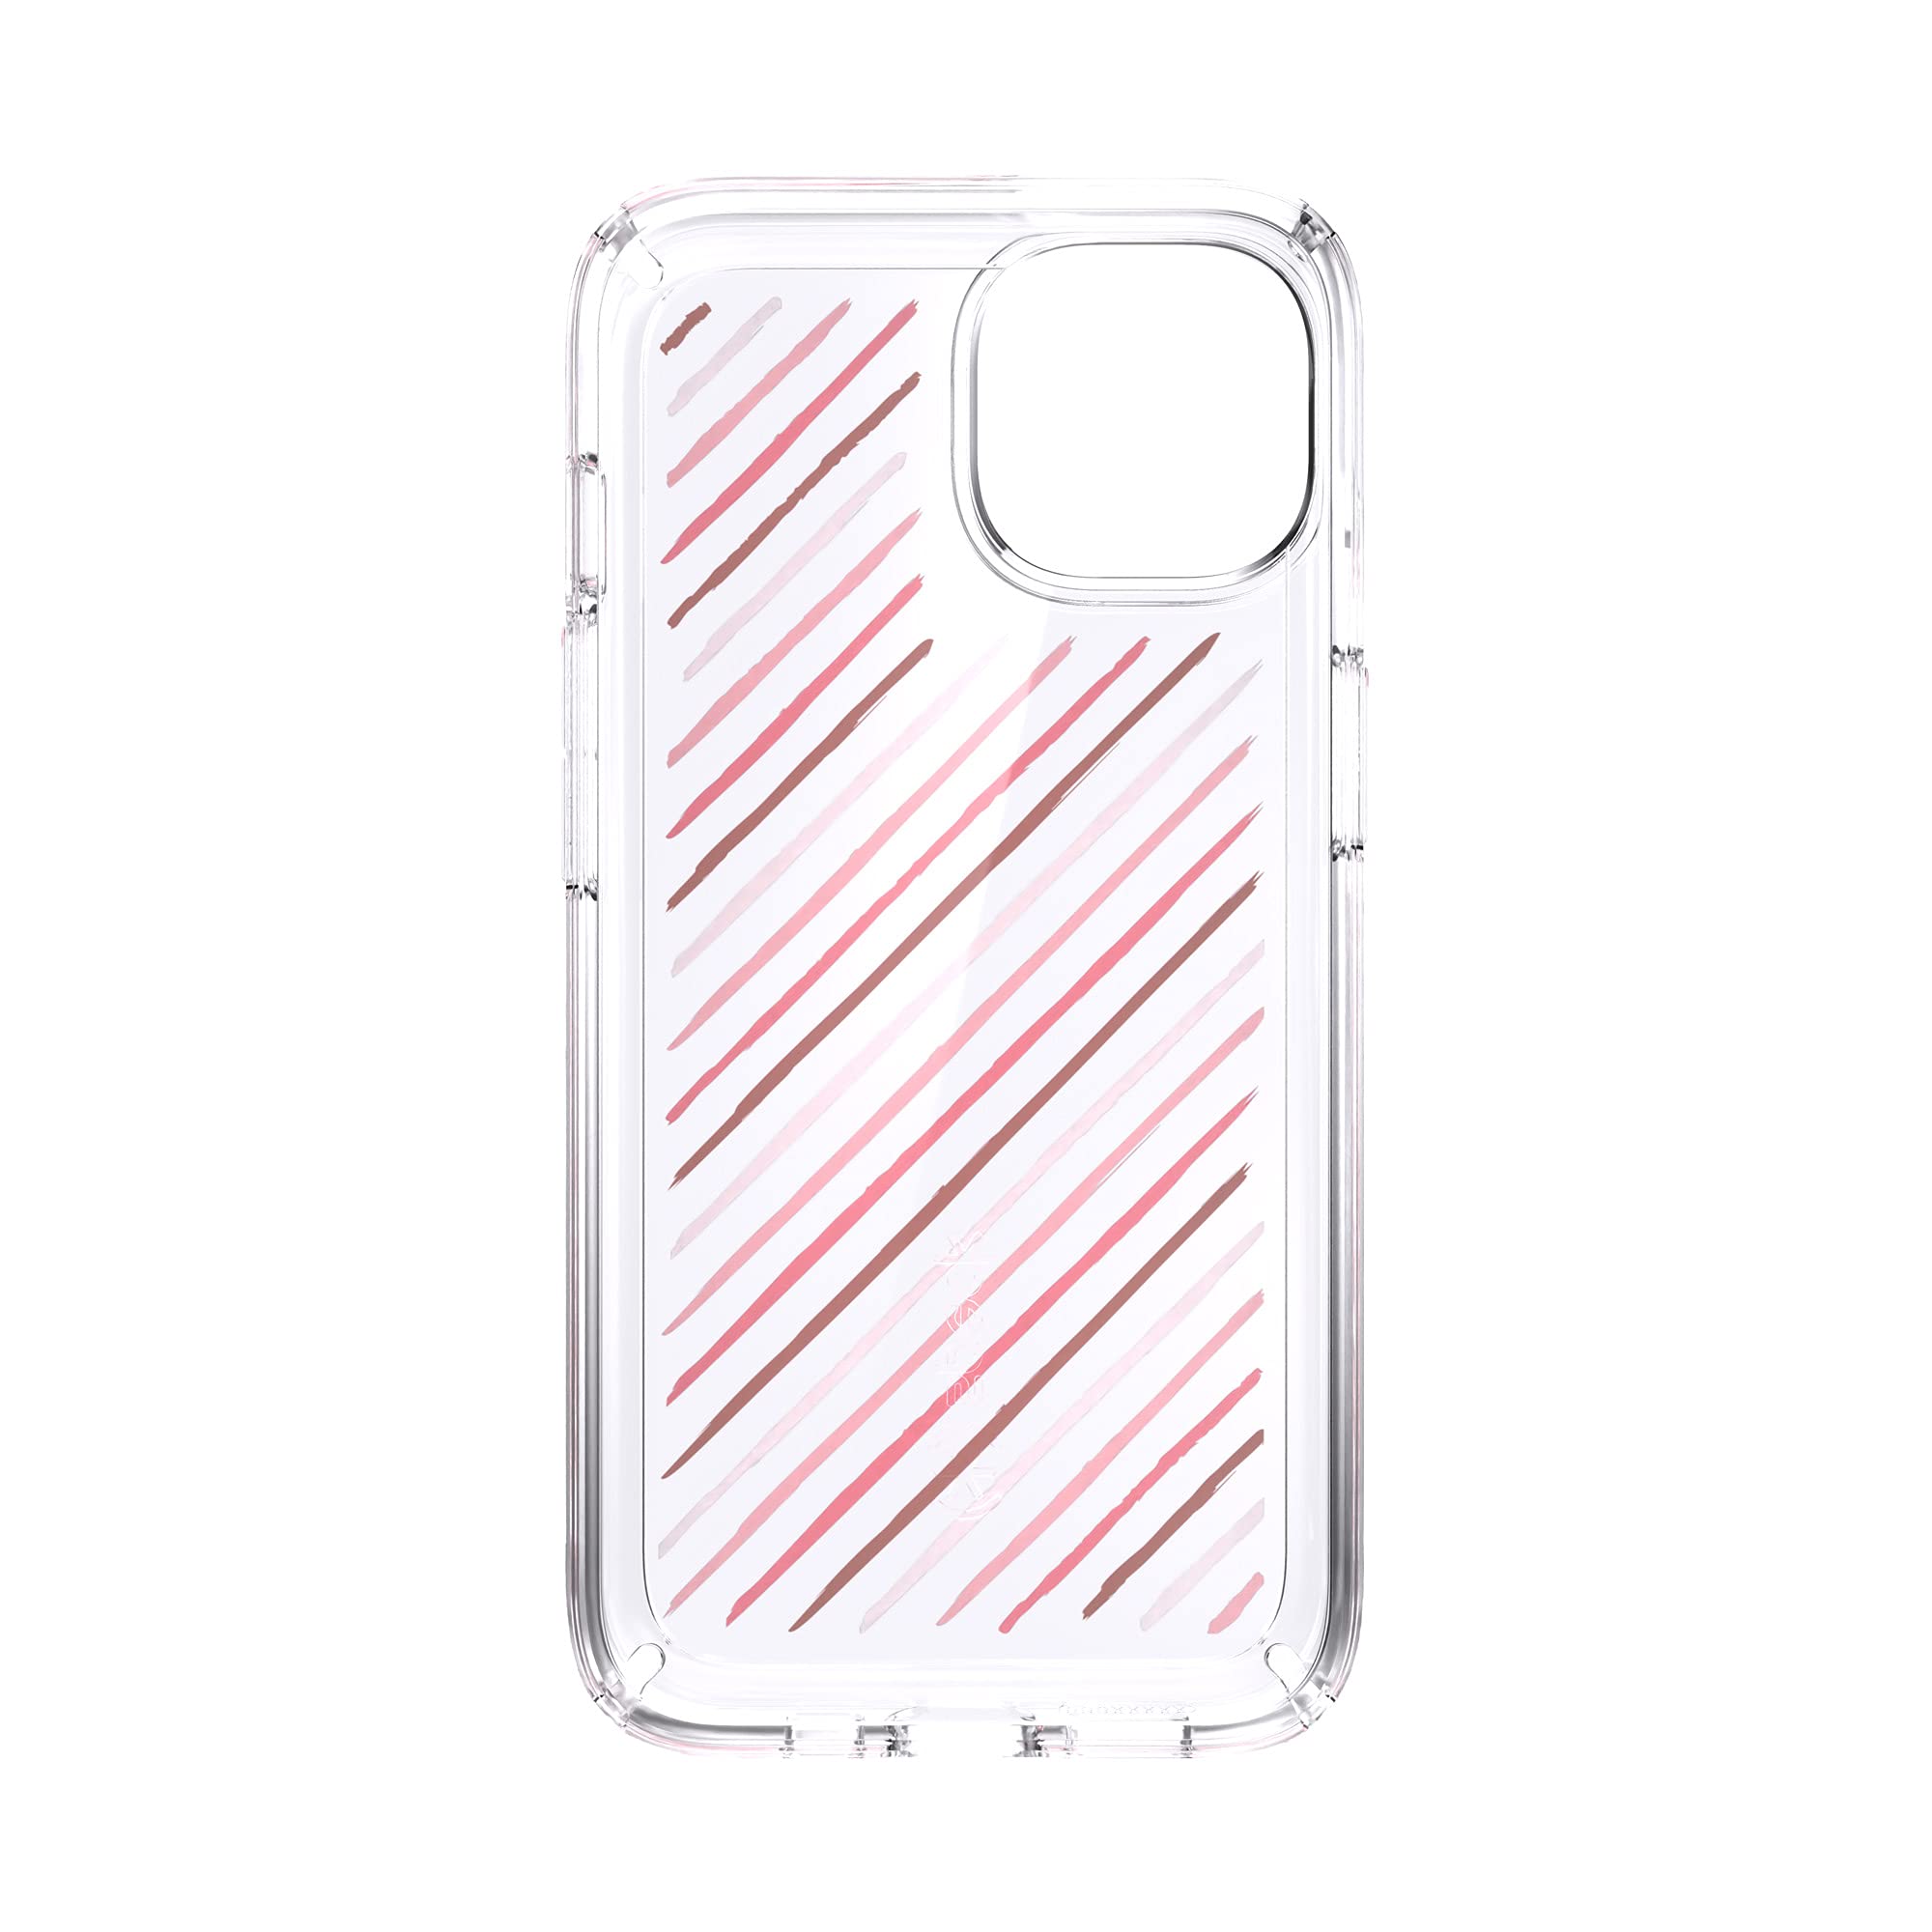 Speck iPhone 13 Stripes Case - Drop Protection with Anti-Yellowing & Anti-Fade with Slim, Dual Layer Design for 6.1 Inch Phones - iPhone 13 Case - Clear, Infused Stripes GemShell